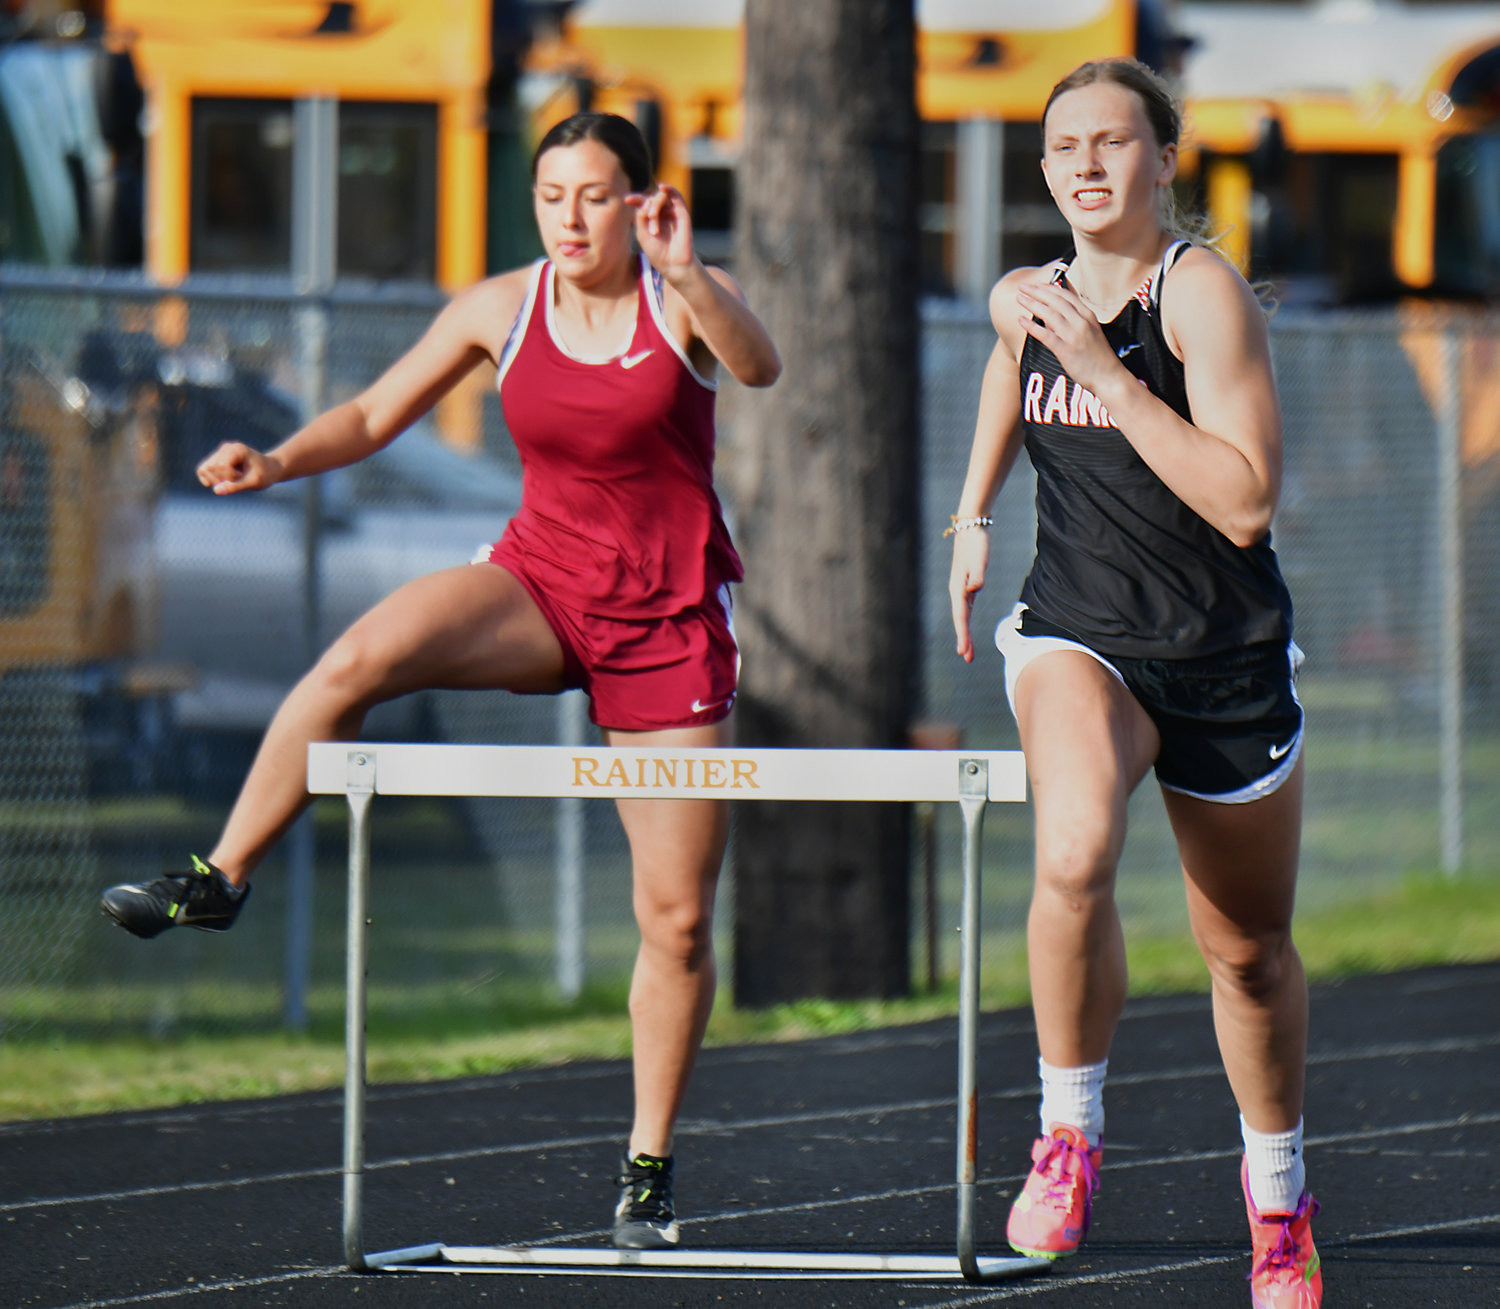 Rainier High School’s Kaeley Schultz, right, competes in the 300-meter hurdles on Thursday, April 29, during the WIAA District 4 Track & Field Championships at Rainier High School.